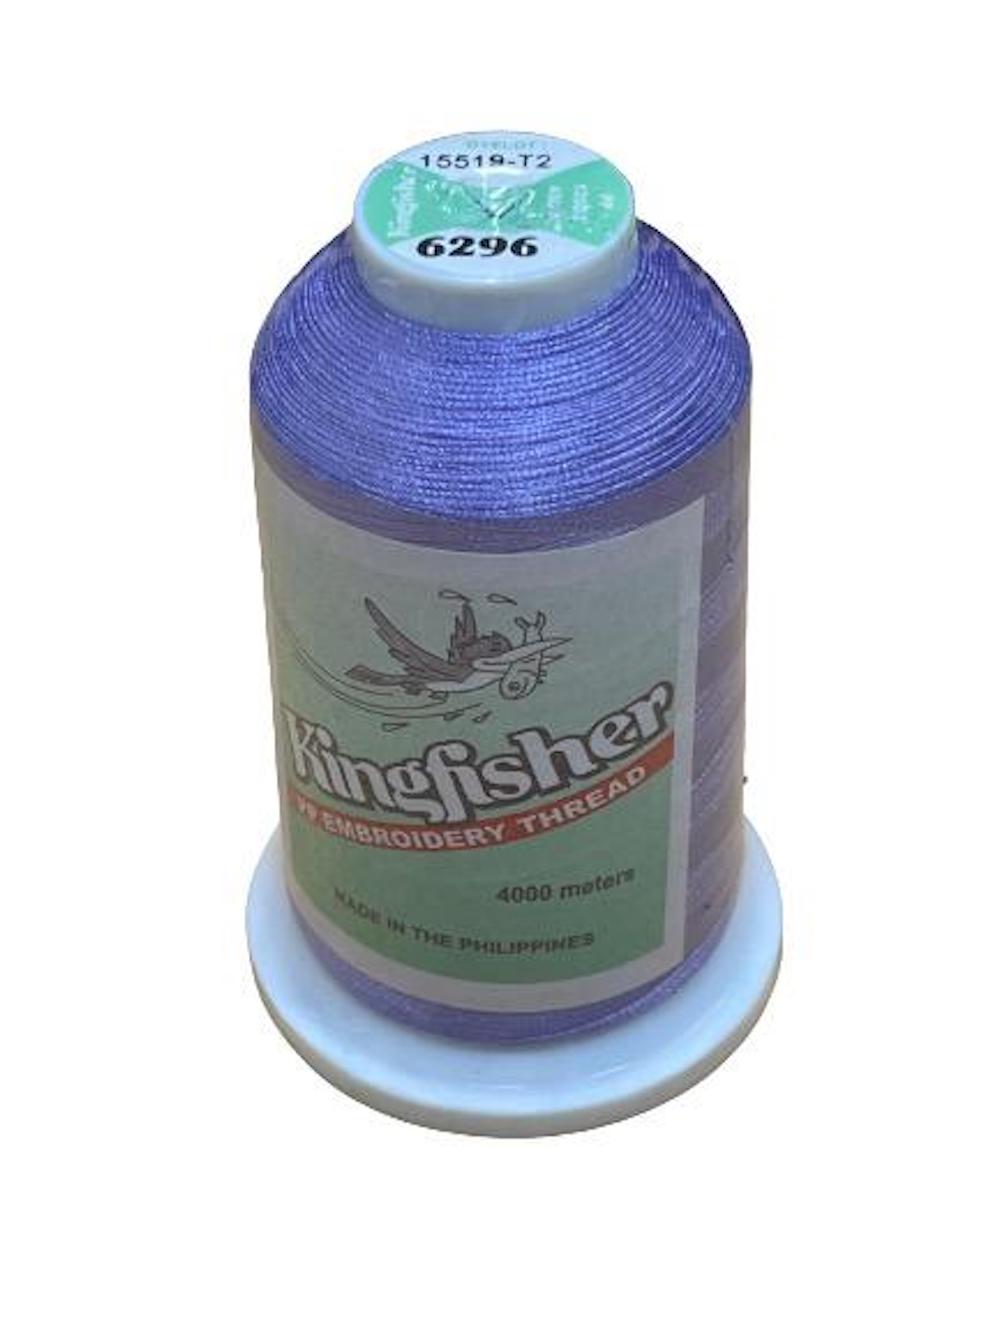 King Fisher Embroidery Thread 4000m 6296 - MY SEWING MALL